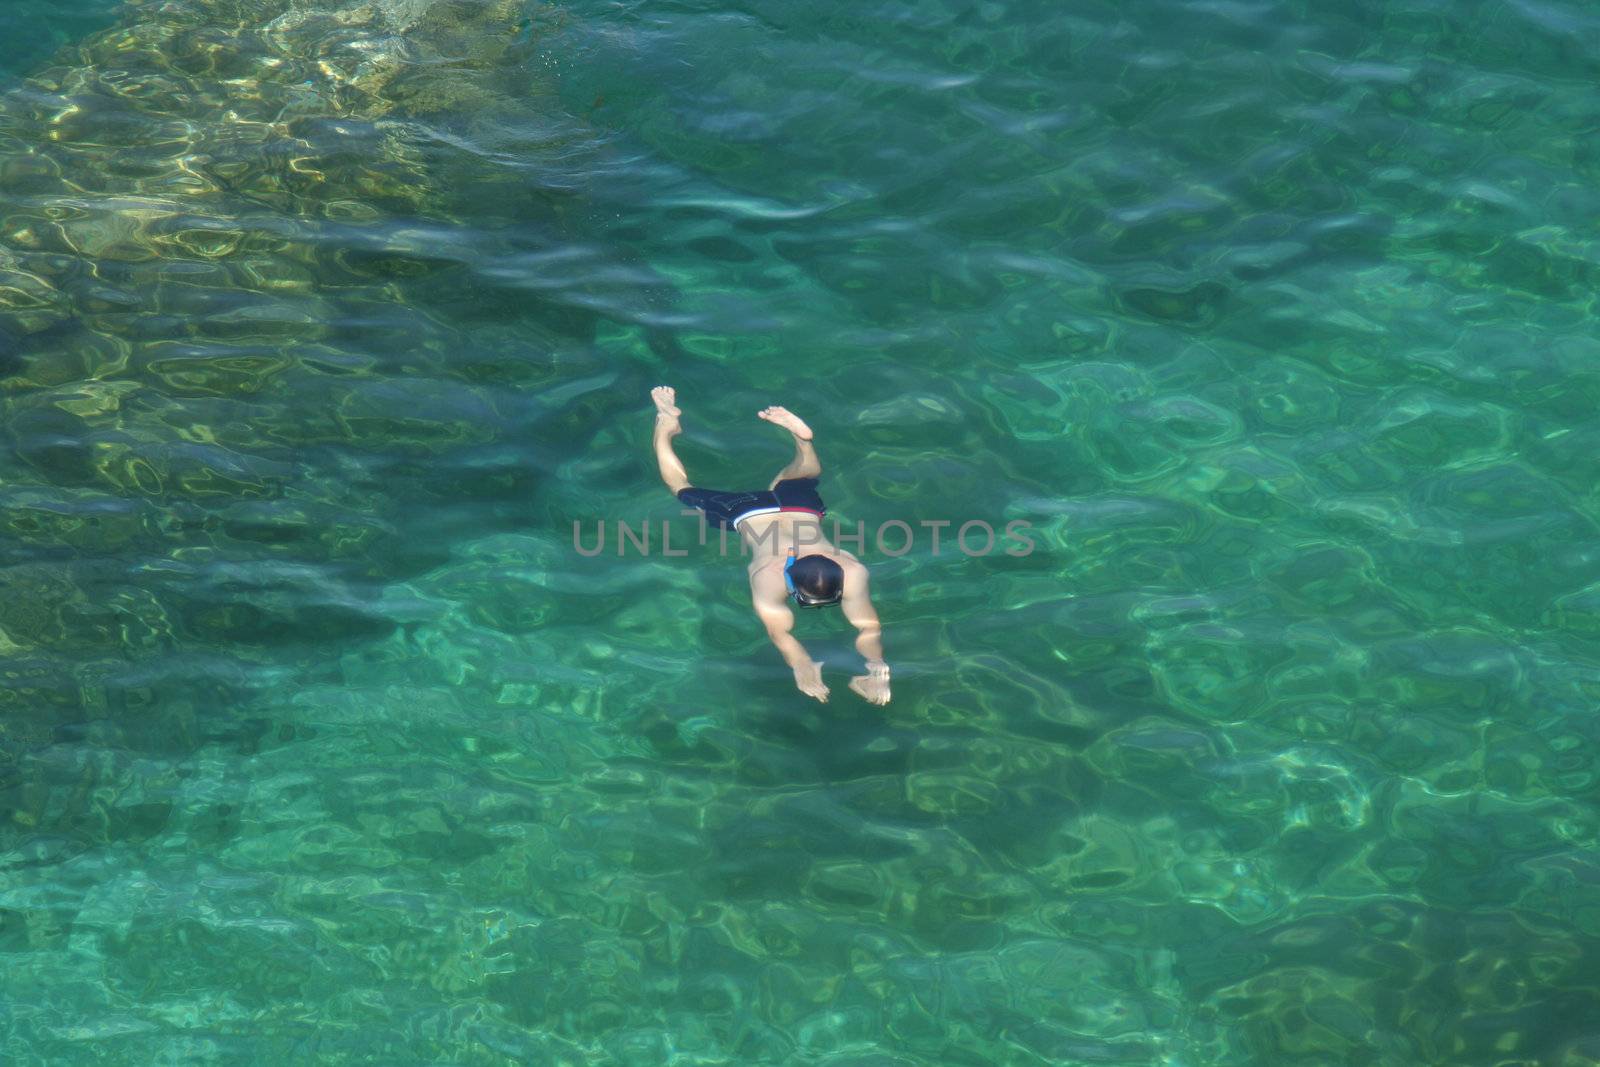 A man swimming under water in the cool waters of Georgian Bay, Ontario, Canada.
